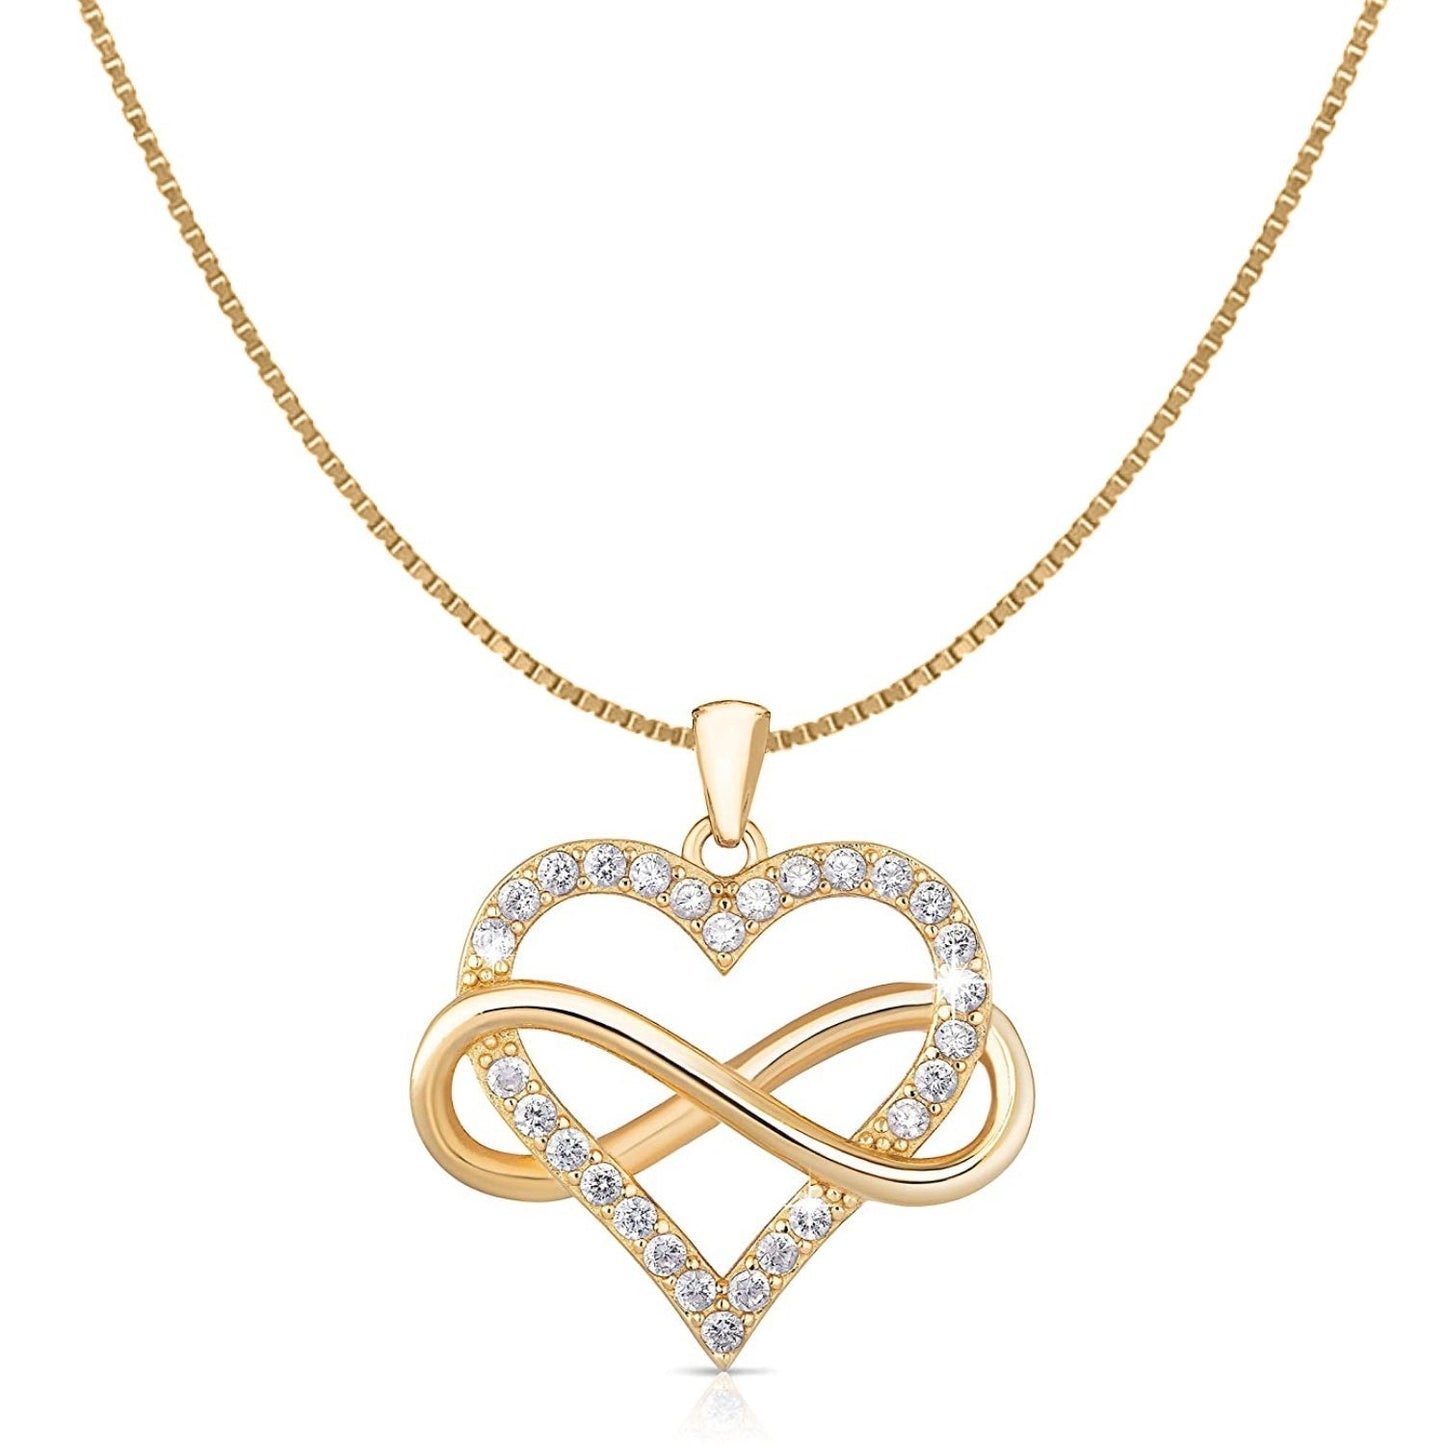 Infinity Gold Heart Pendant in 92.5 Silver - Infinite Love - studded with Swiss Zirconia - 18K Gold Finish